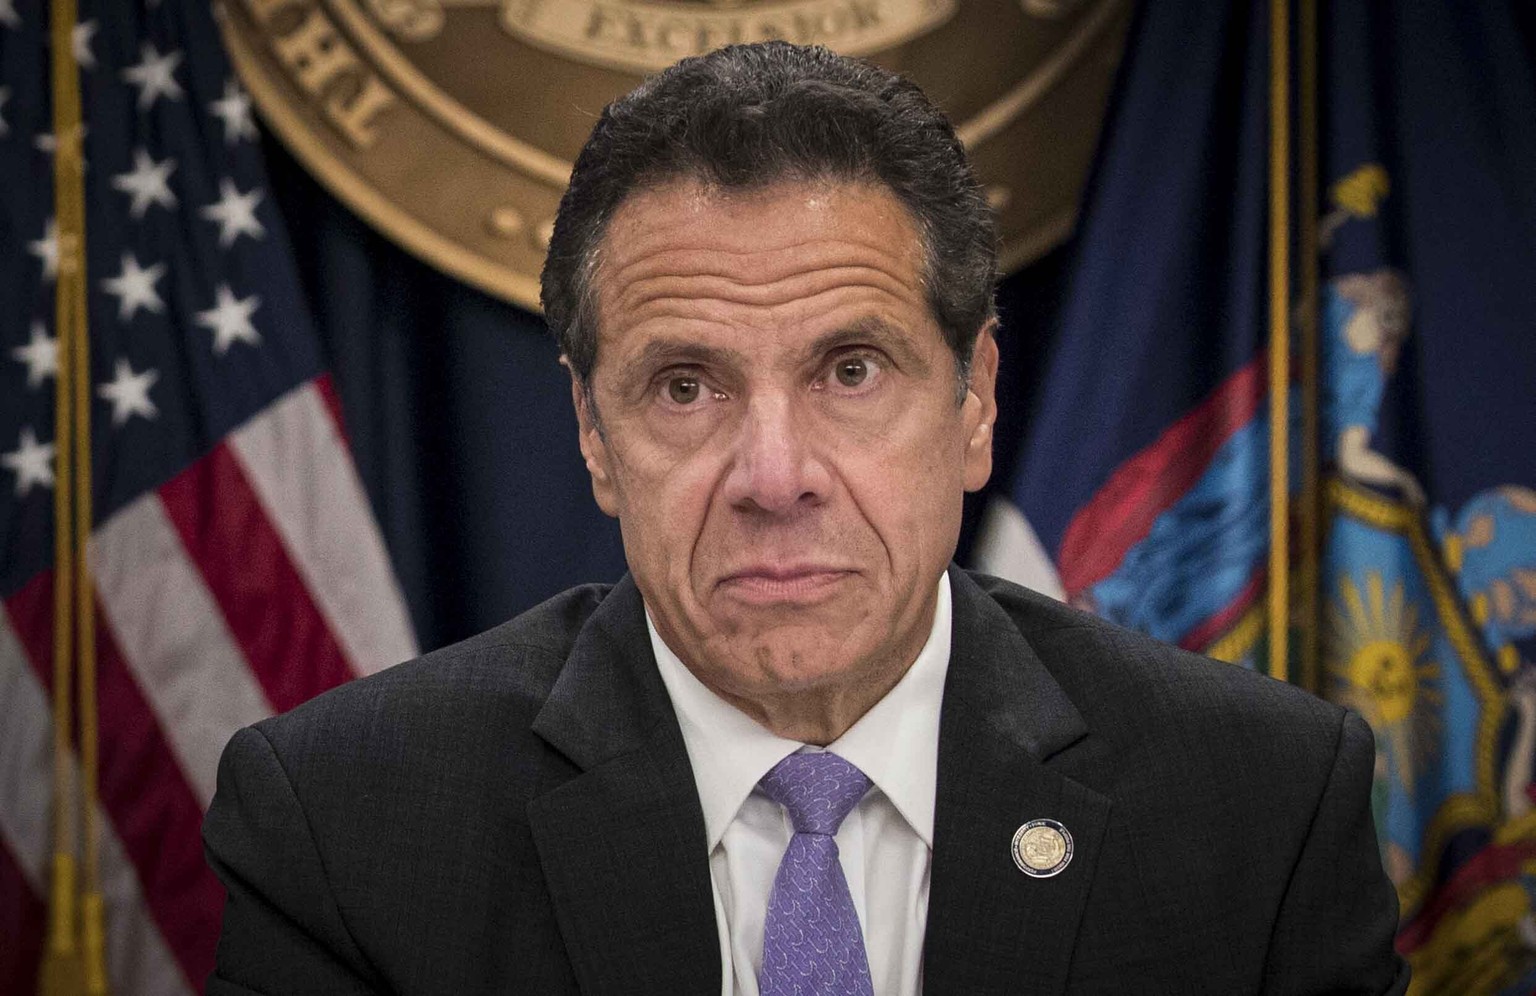 FILE - In this Sept. 14, 2018 file photo, Gov. Andrew Cuomo listens during a news conference in New York. Gov. Andrew Cuomo is expected to be interviewed by investigators with the state attorney gener ...